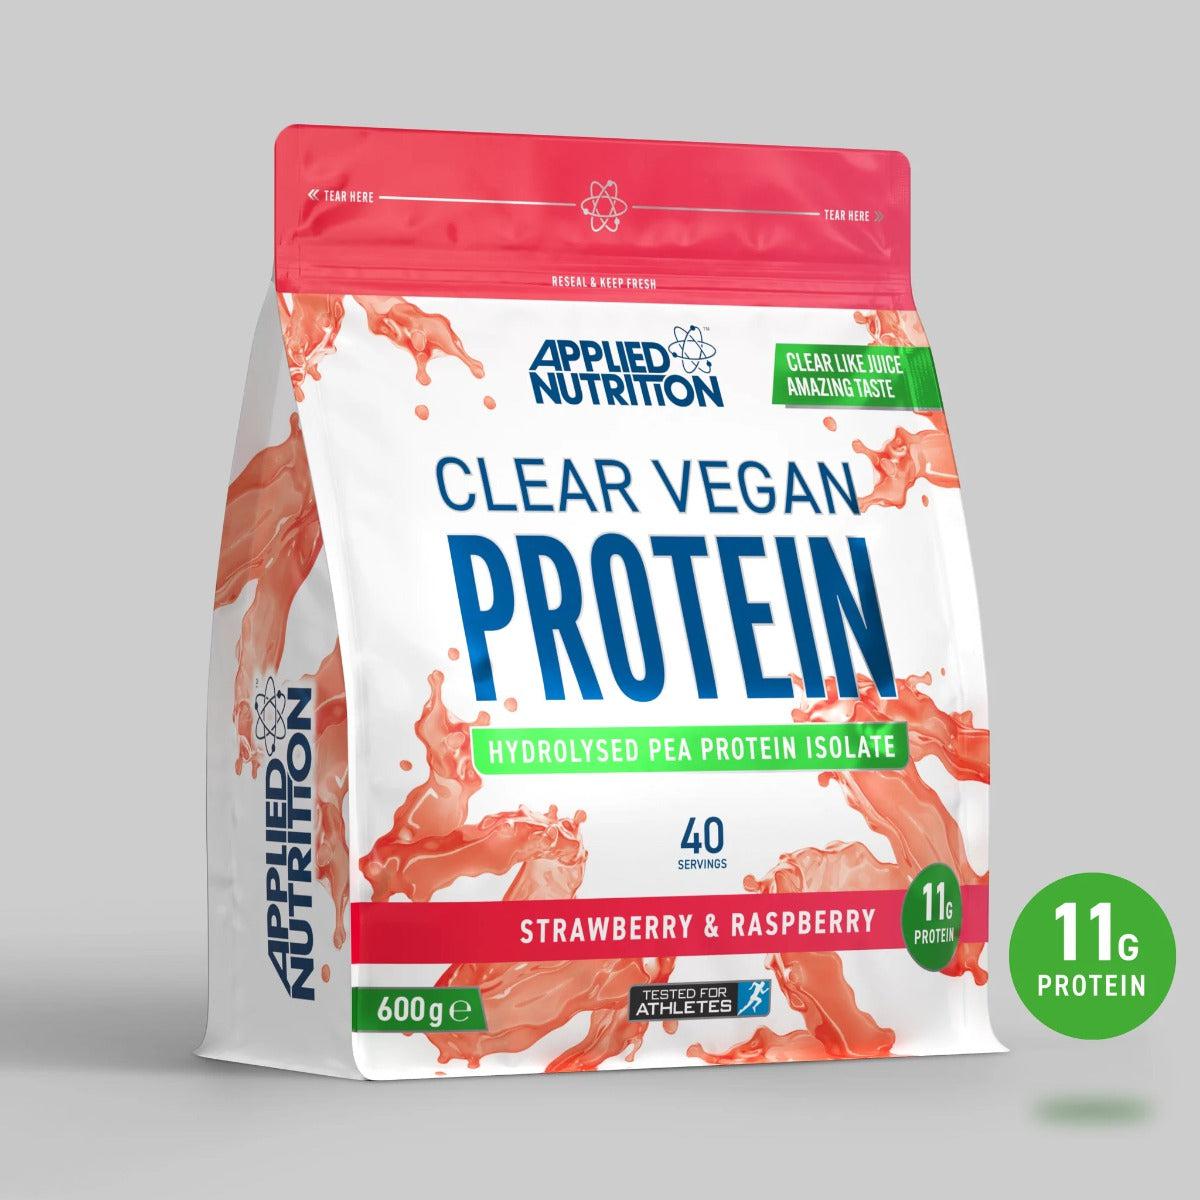 Applied Nutrition Clear Vegan Protein Hydrolised Pea Protein Isolate Strawberry & Raspberry 600g